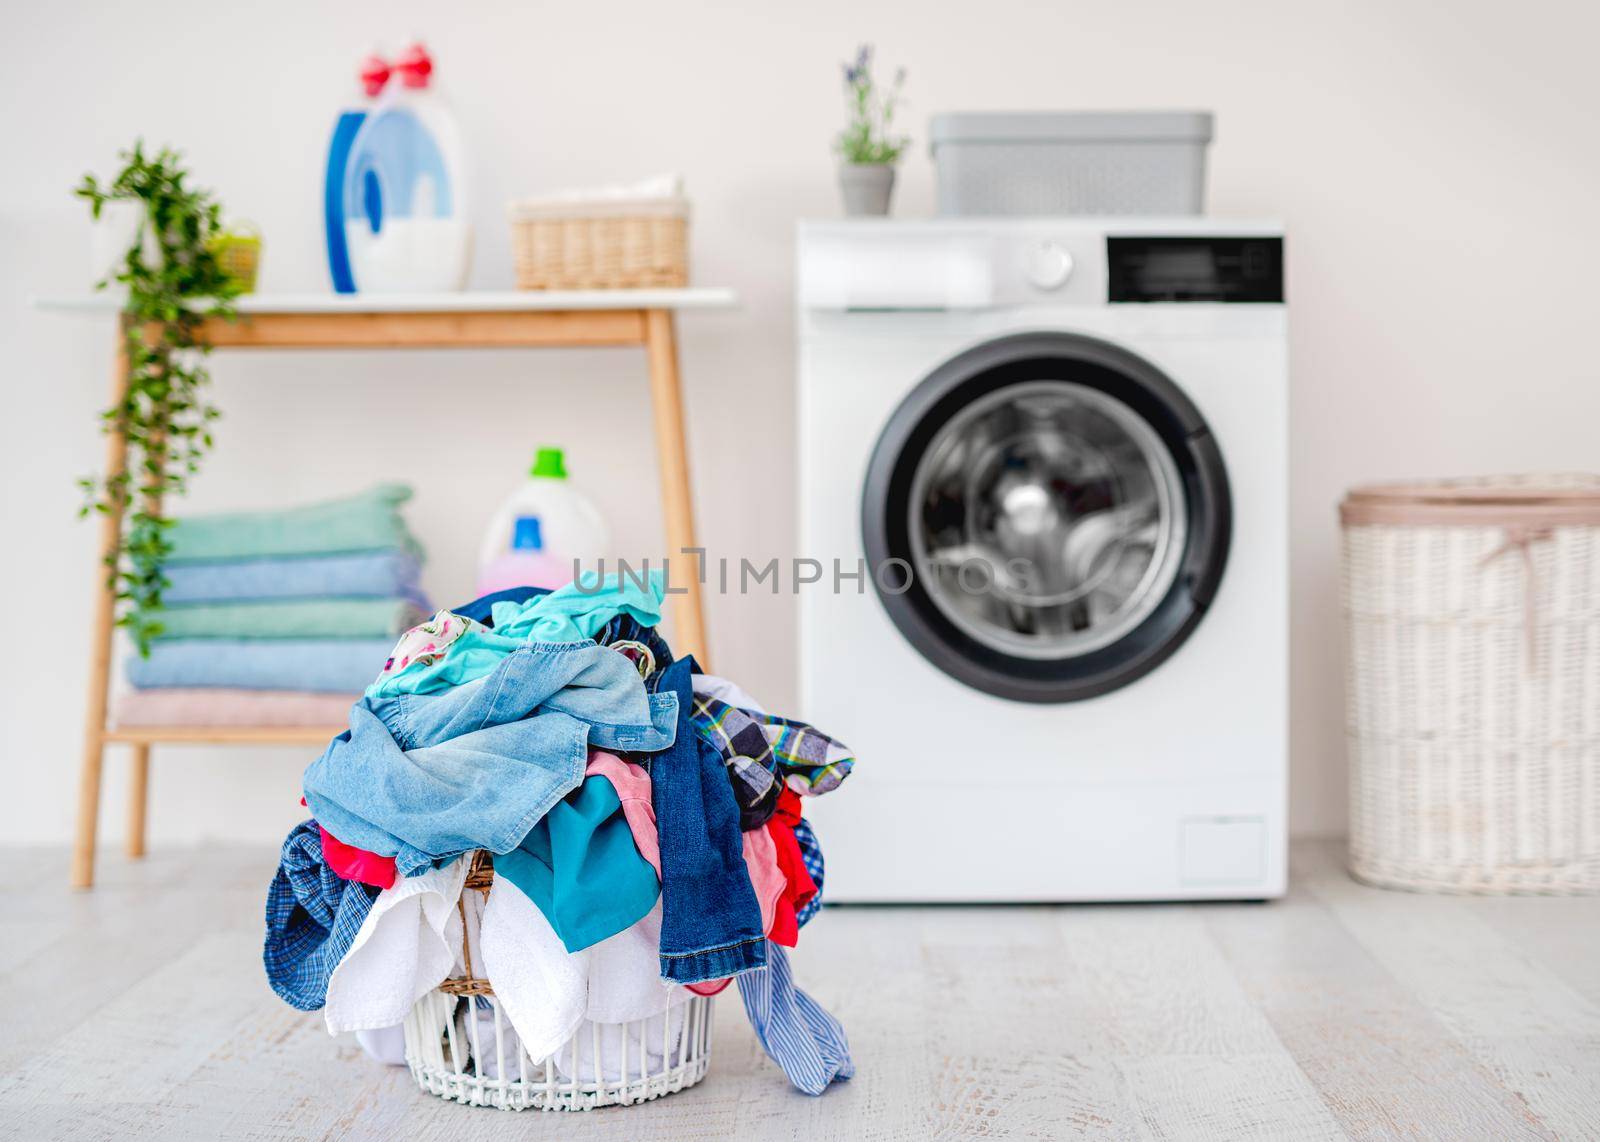 Heap of clothes for washing in basket standing on floor near washing machine in light bathroom